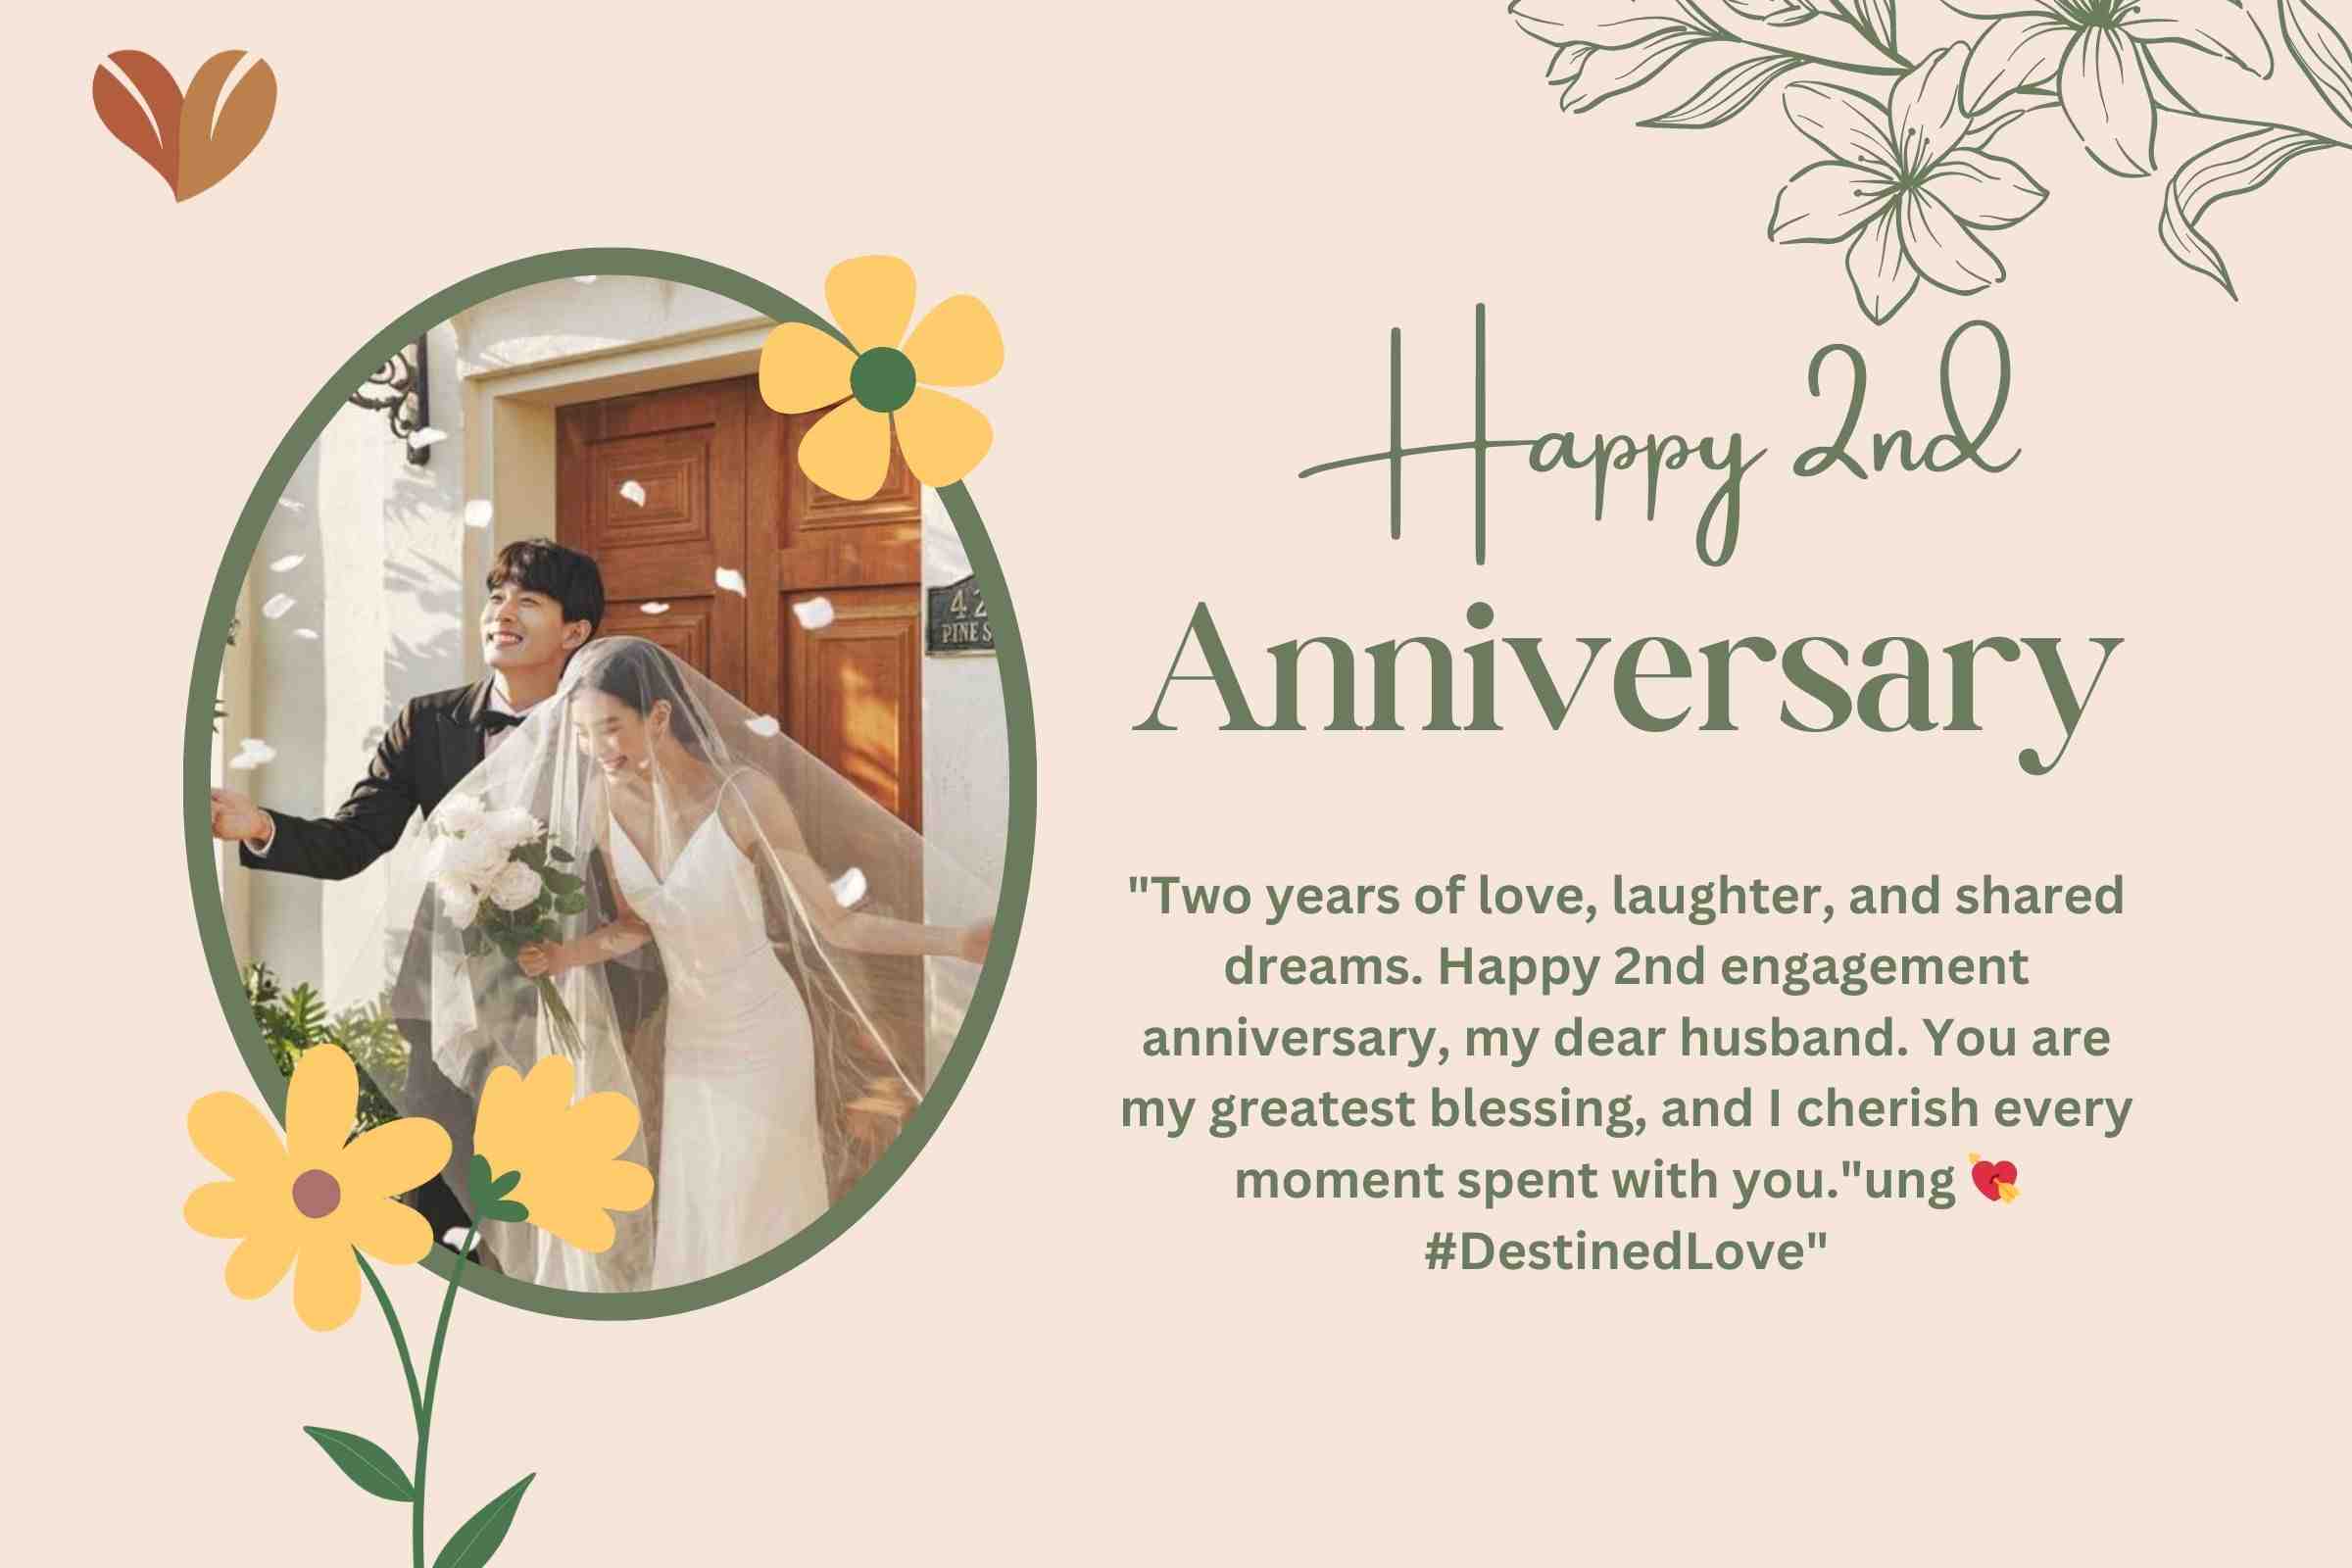 "Two years of love, laughter, and shared dreams. Happy 2nd engagement anniversary, my dear husband. You are my greatest blessing, and I cherish every moment spent with you."ung 💘 #DestinedLove"